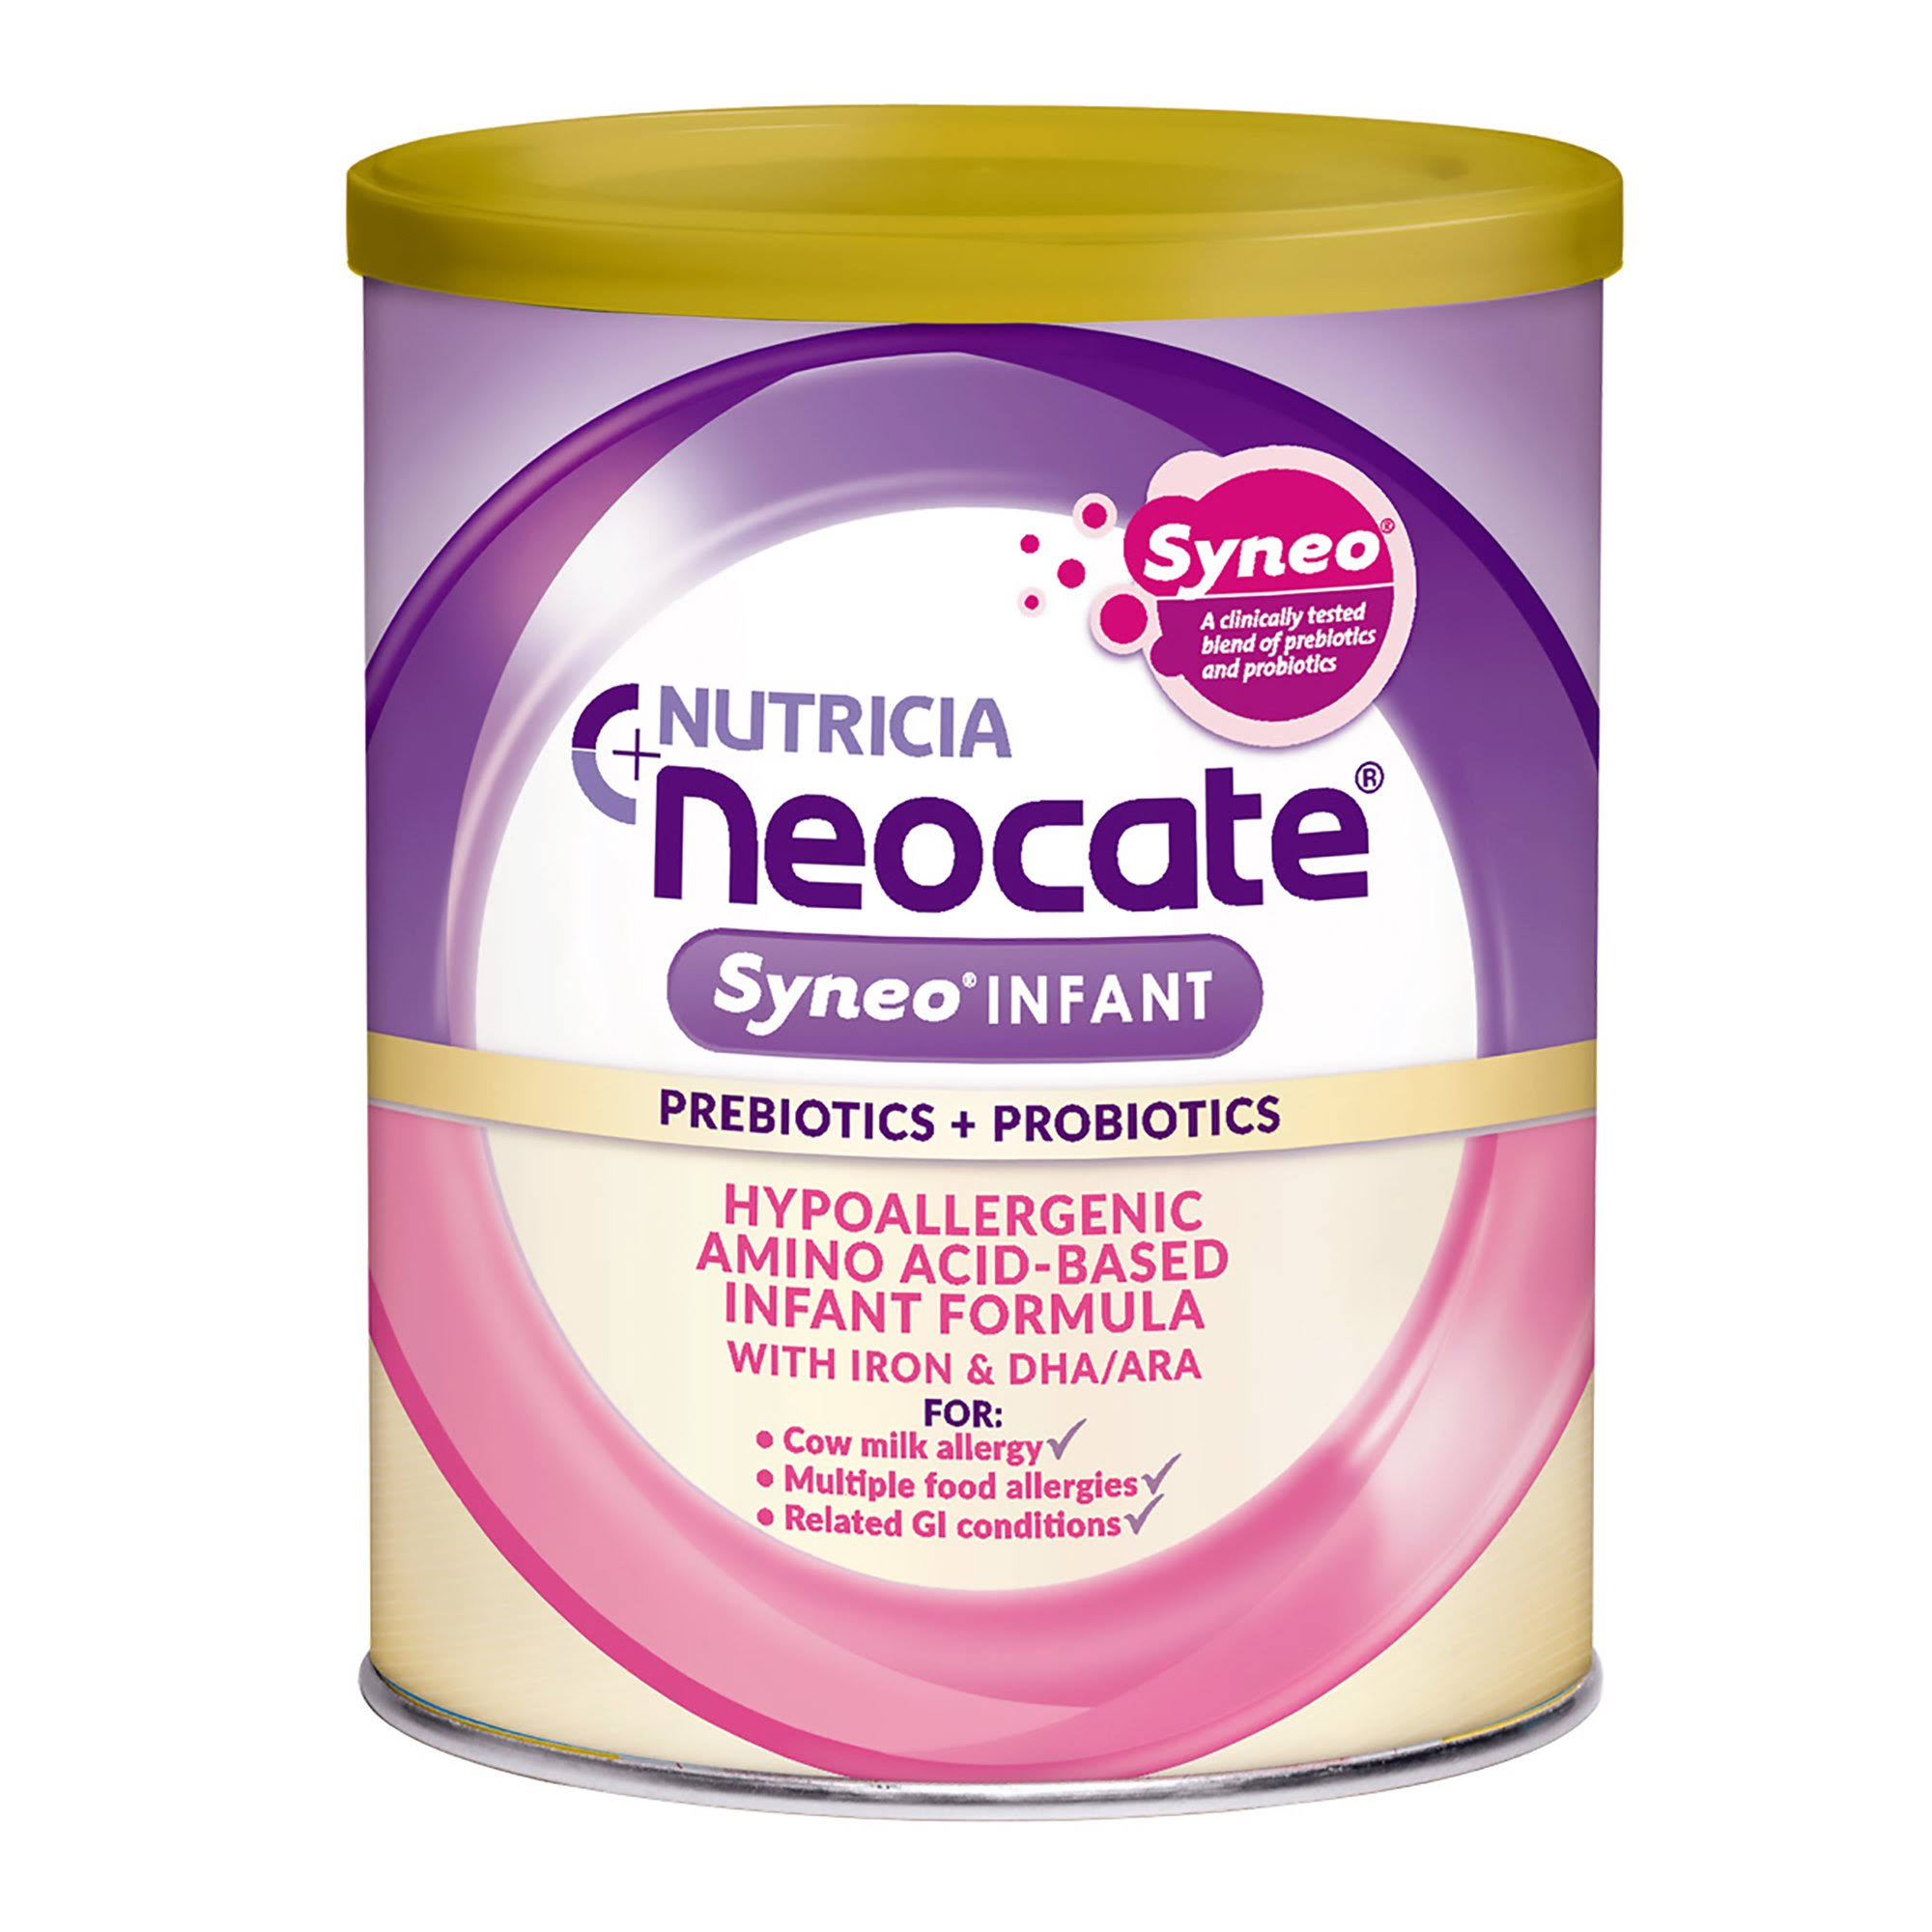 Neocate Syneo Infant - 14.1oz